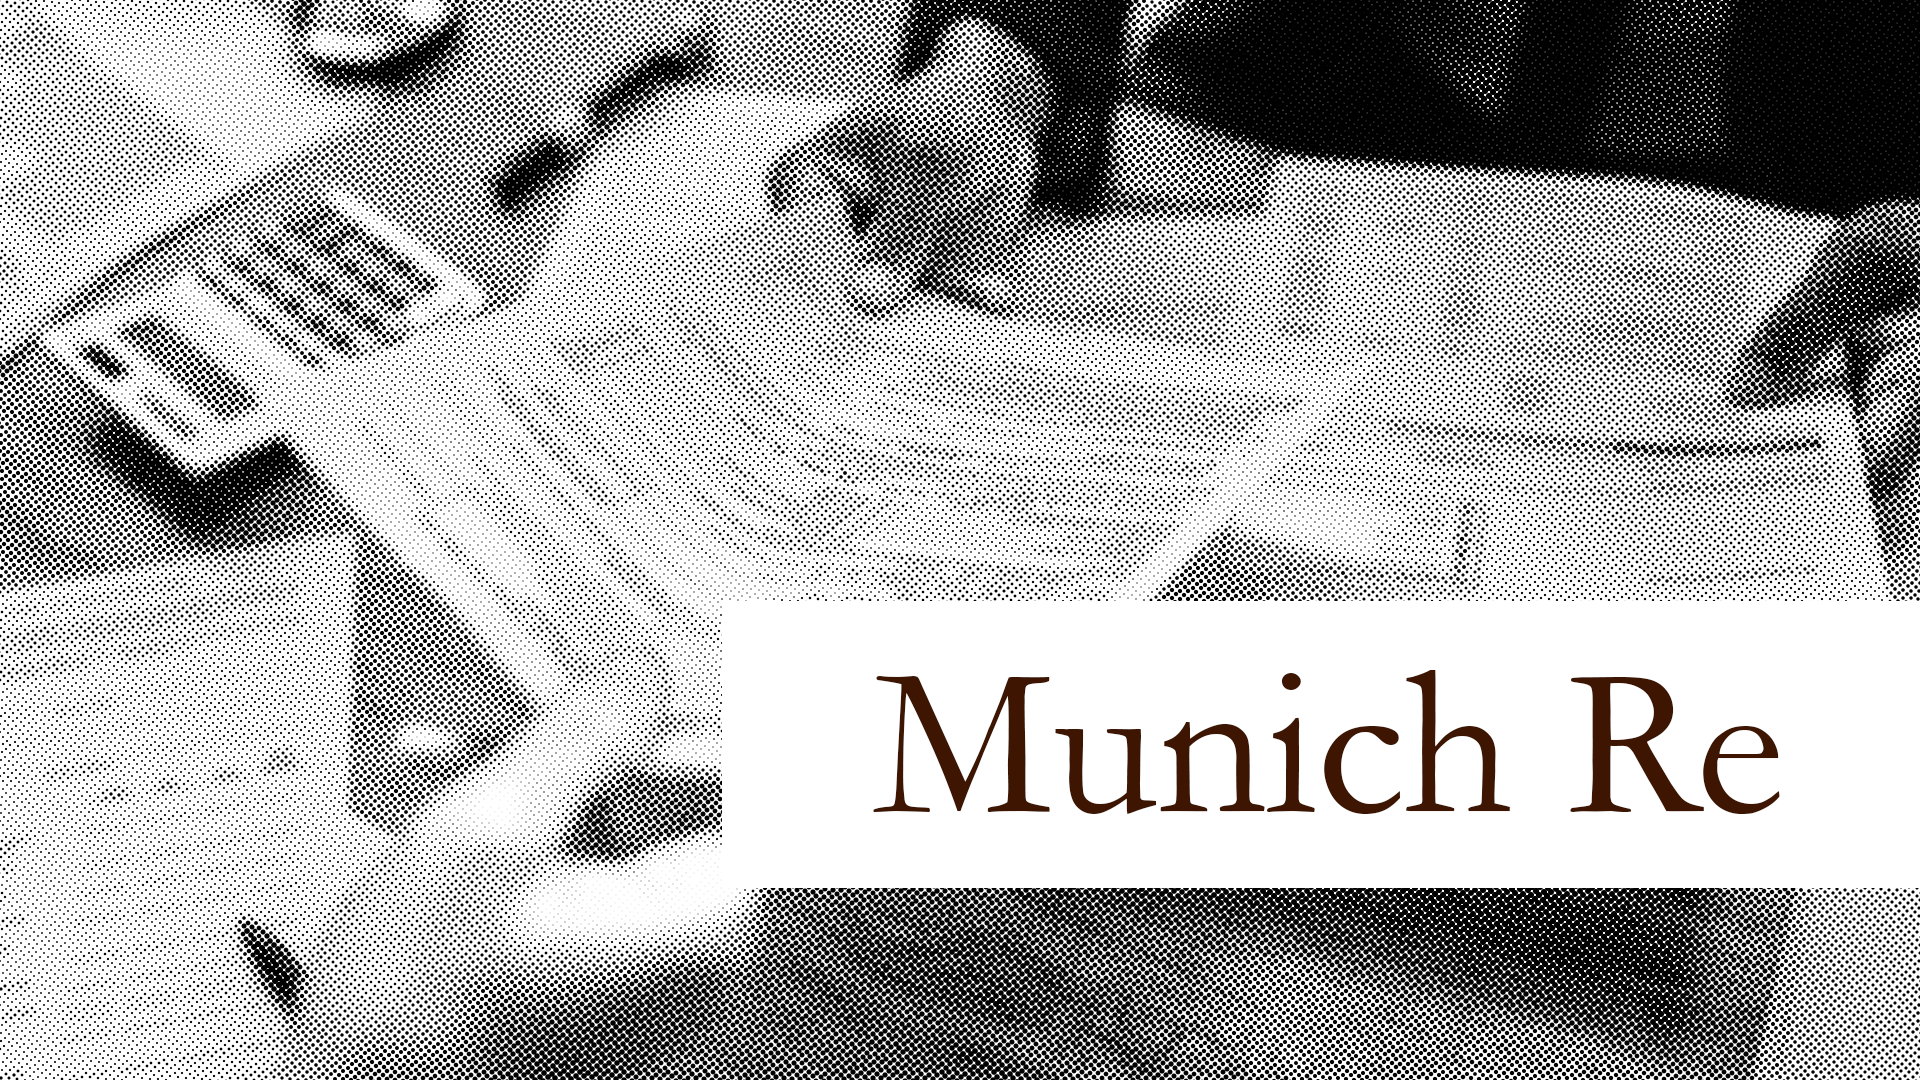 Munich Re: No more oil and gas